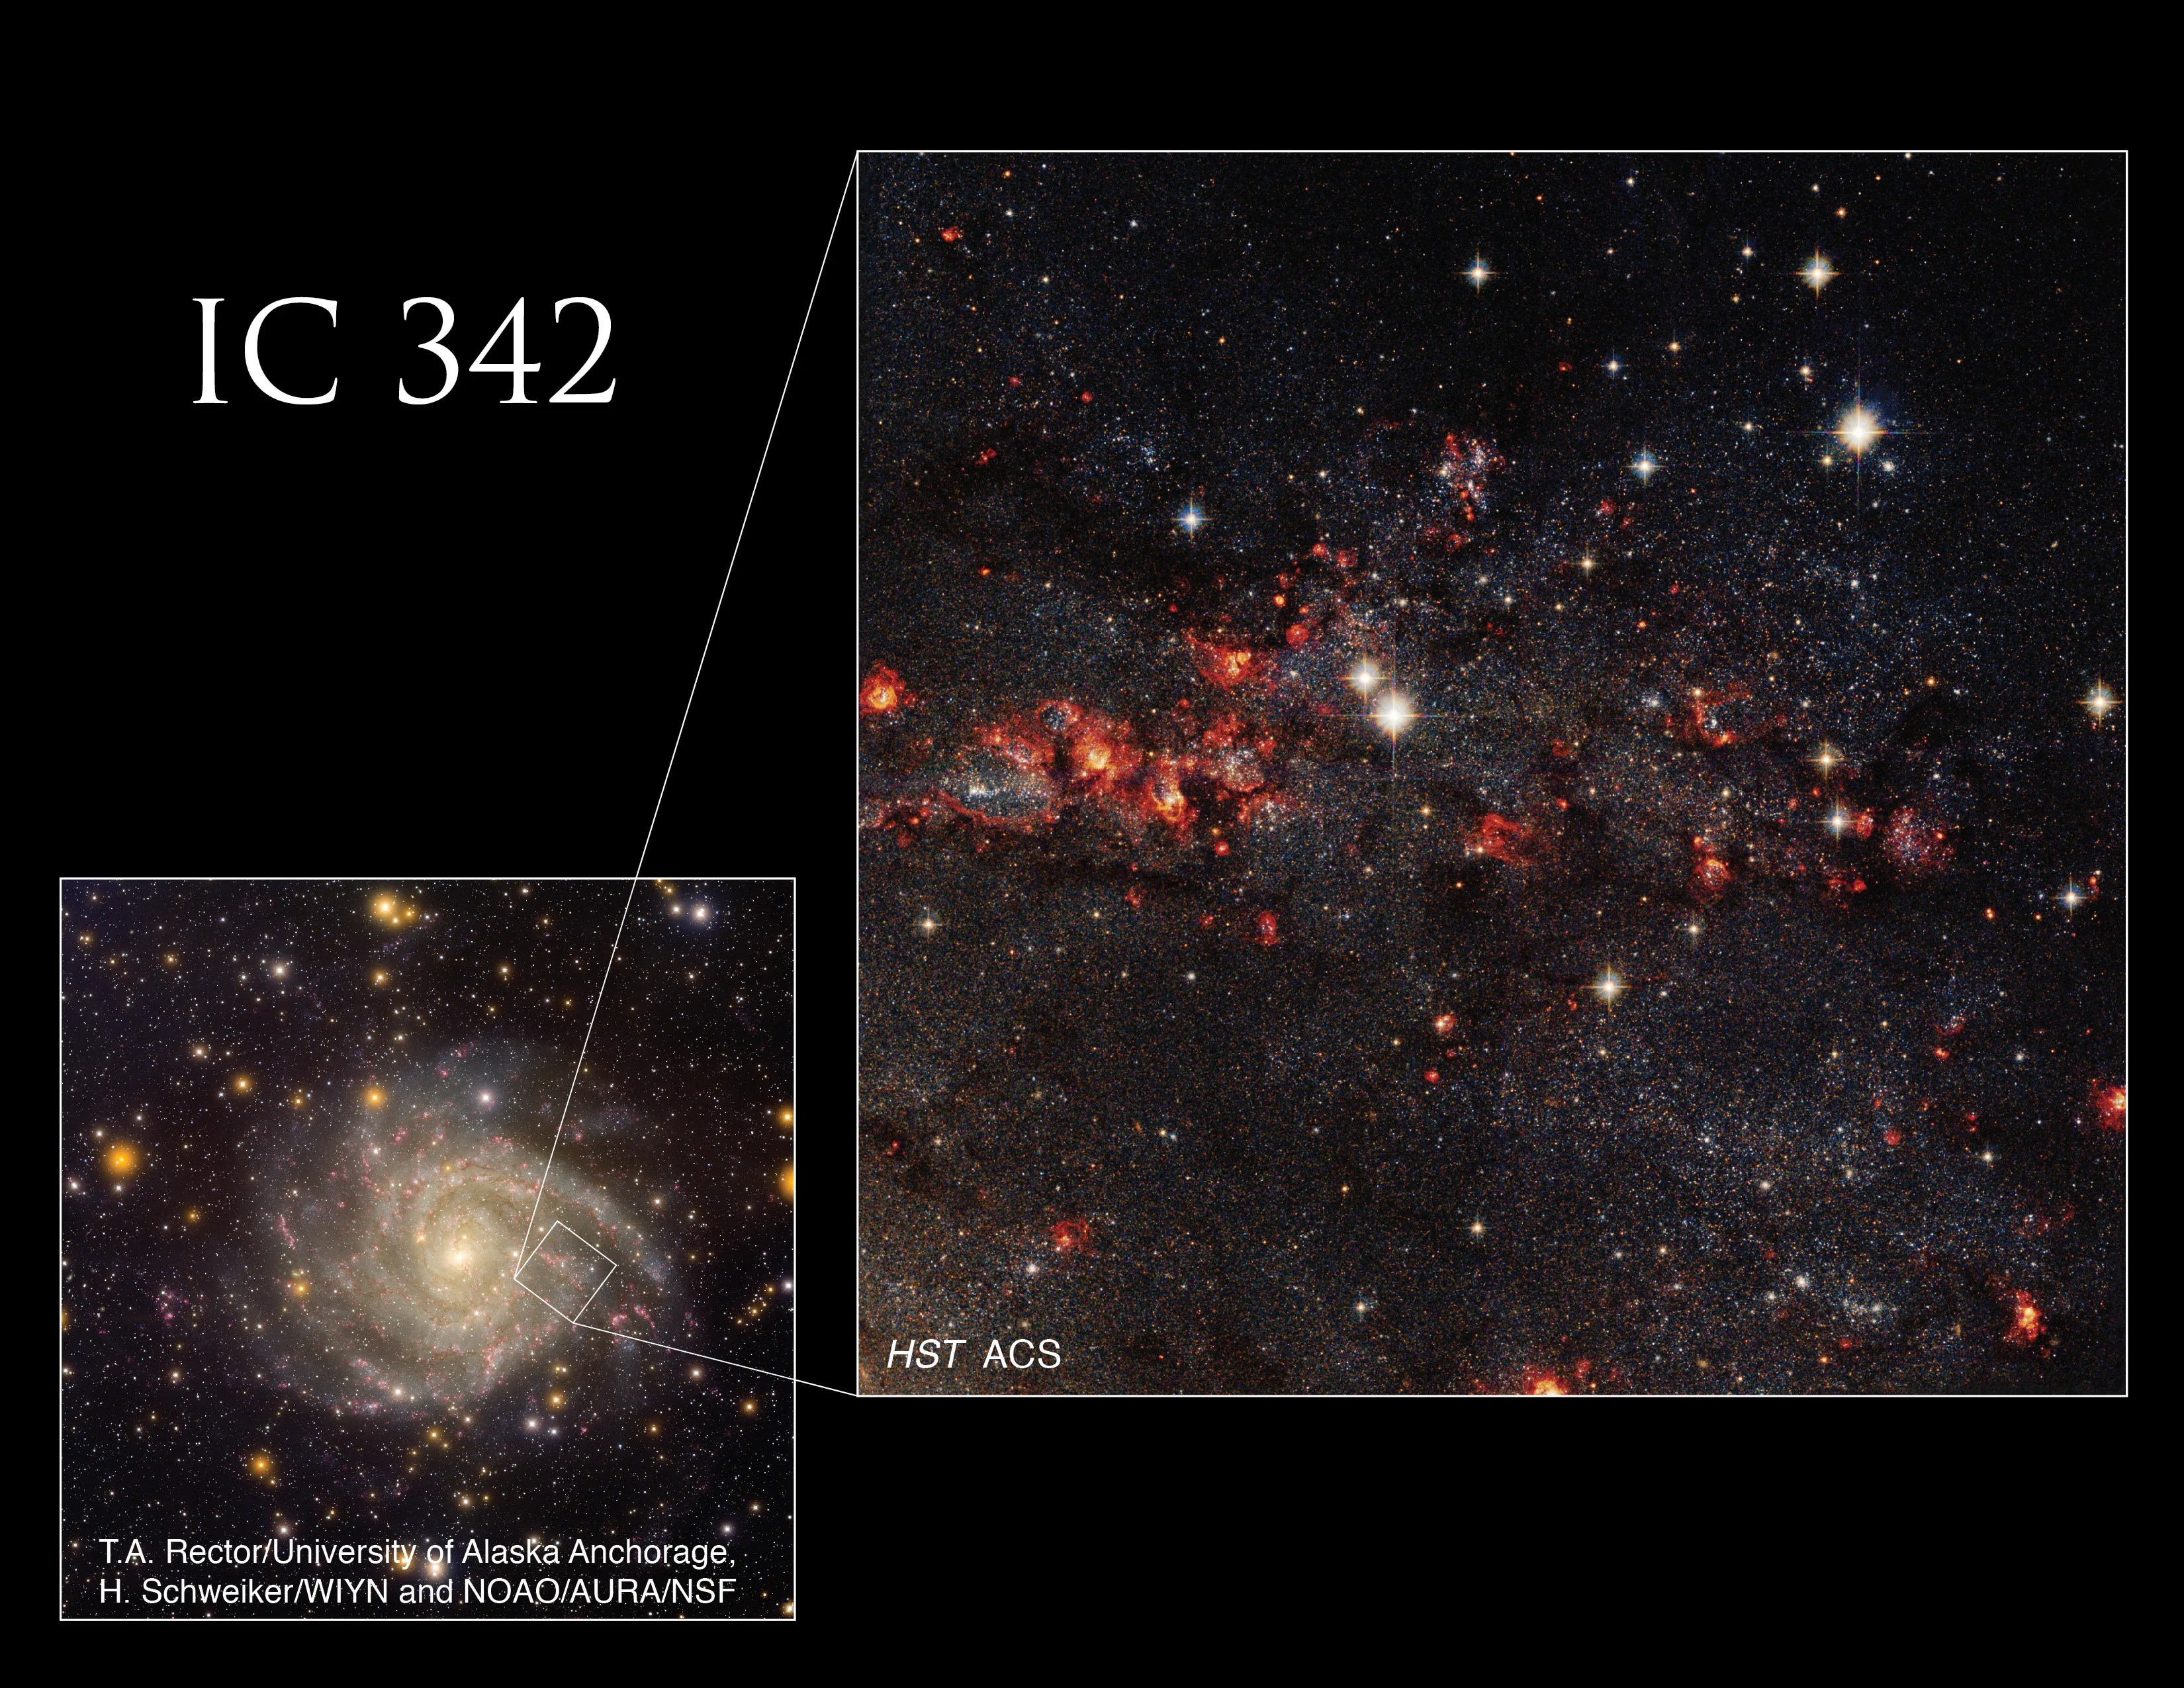 On the left side of the image is a spiral galaxy, on the right the inset shows a zoom in with dark red stars and dust and gas.